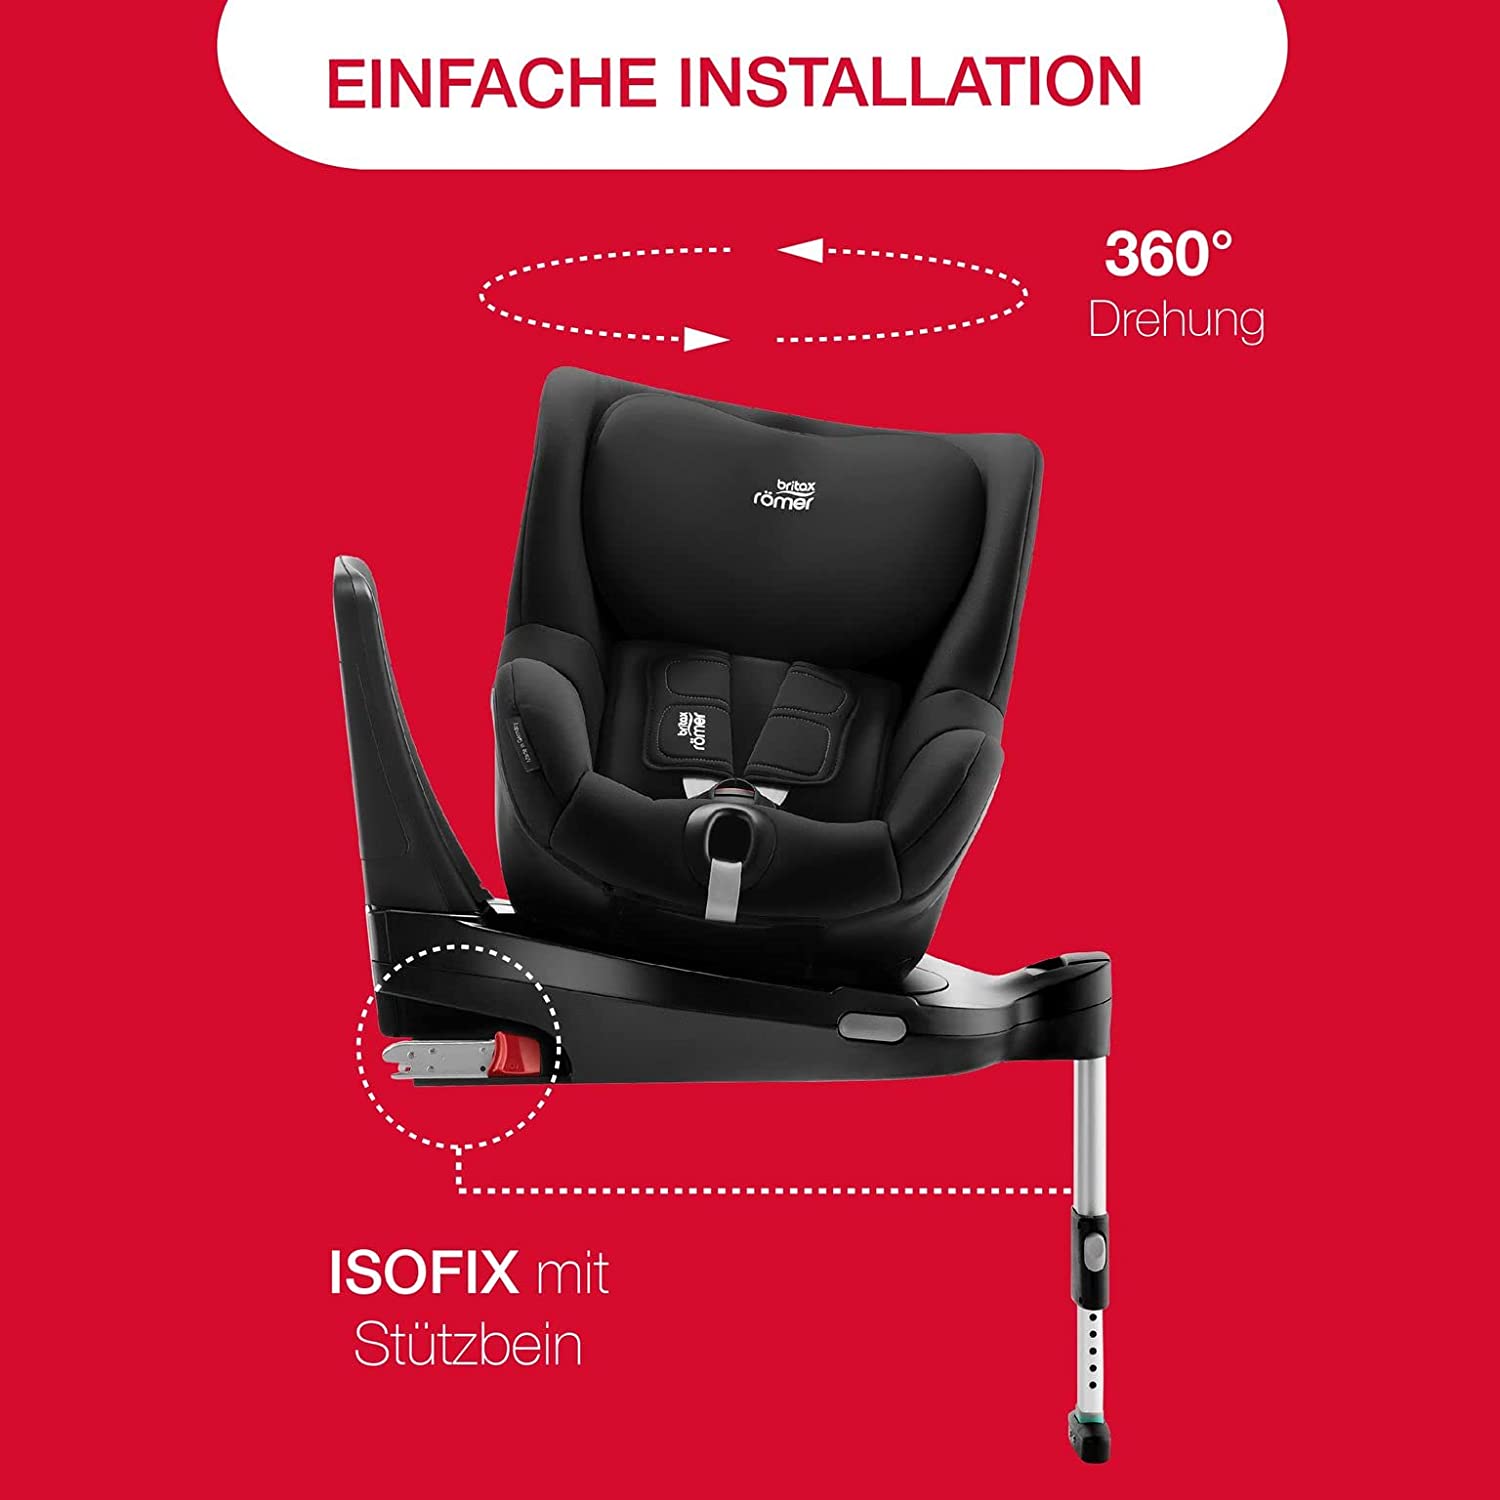 Britax Römer Dualfix Car Seat from Birth / 3 Months to 4 Years, Isofix Group 0+/1 Cosmos Black